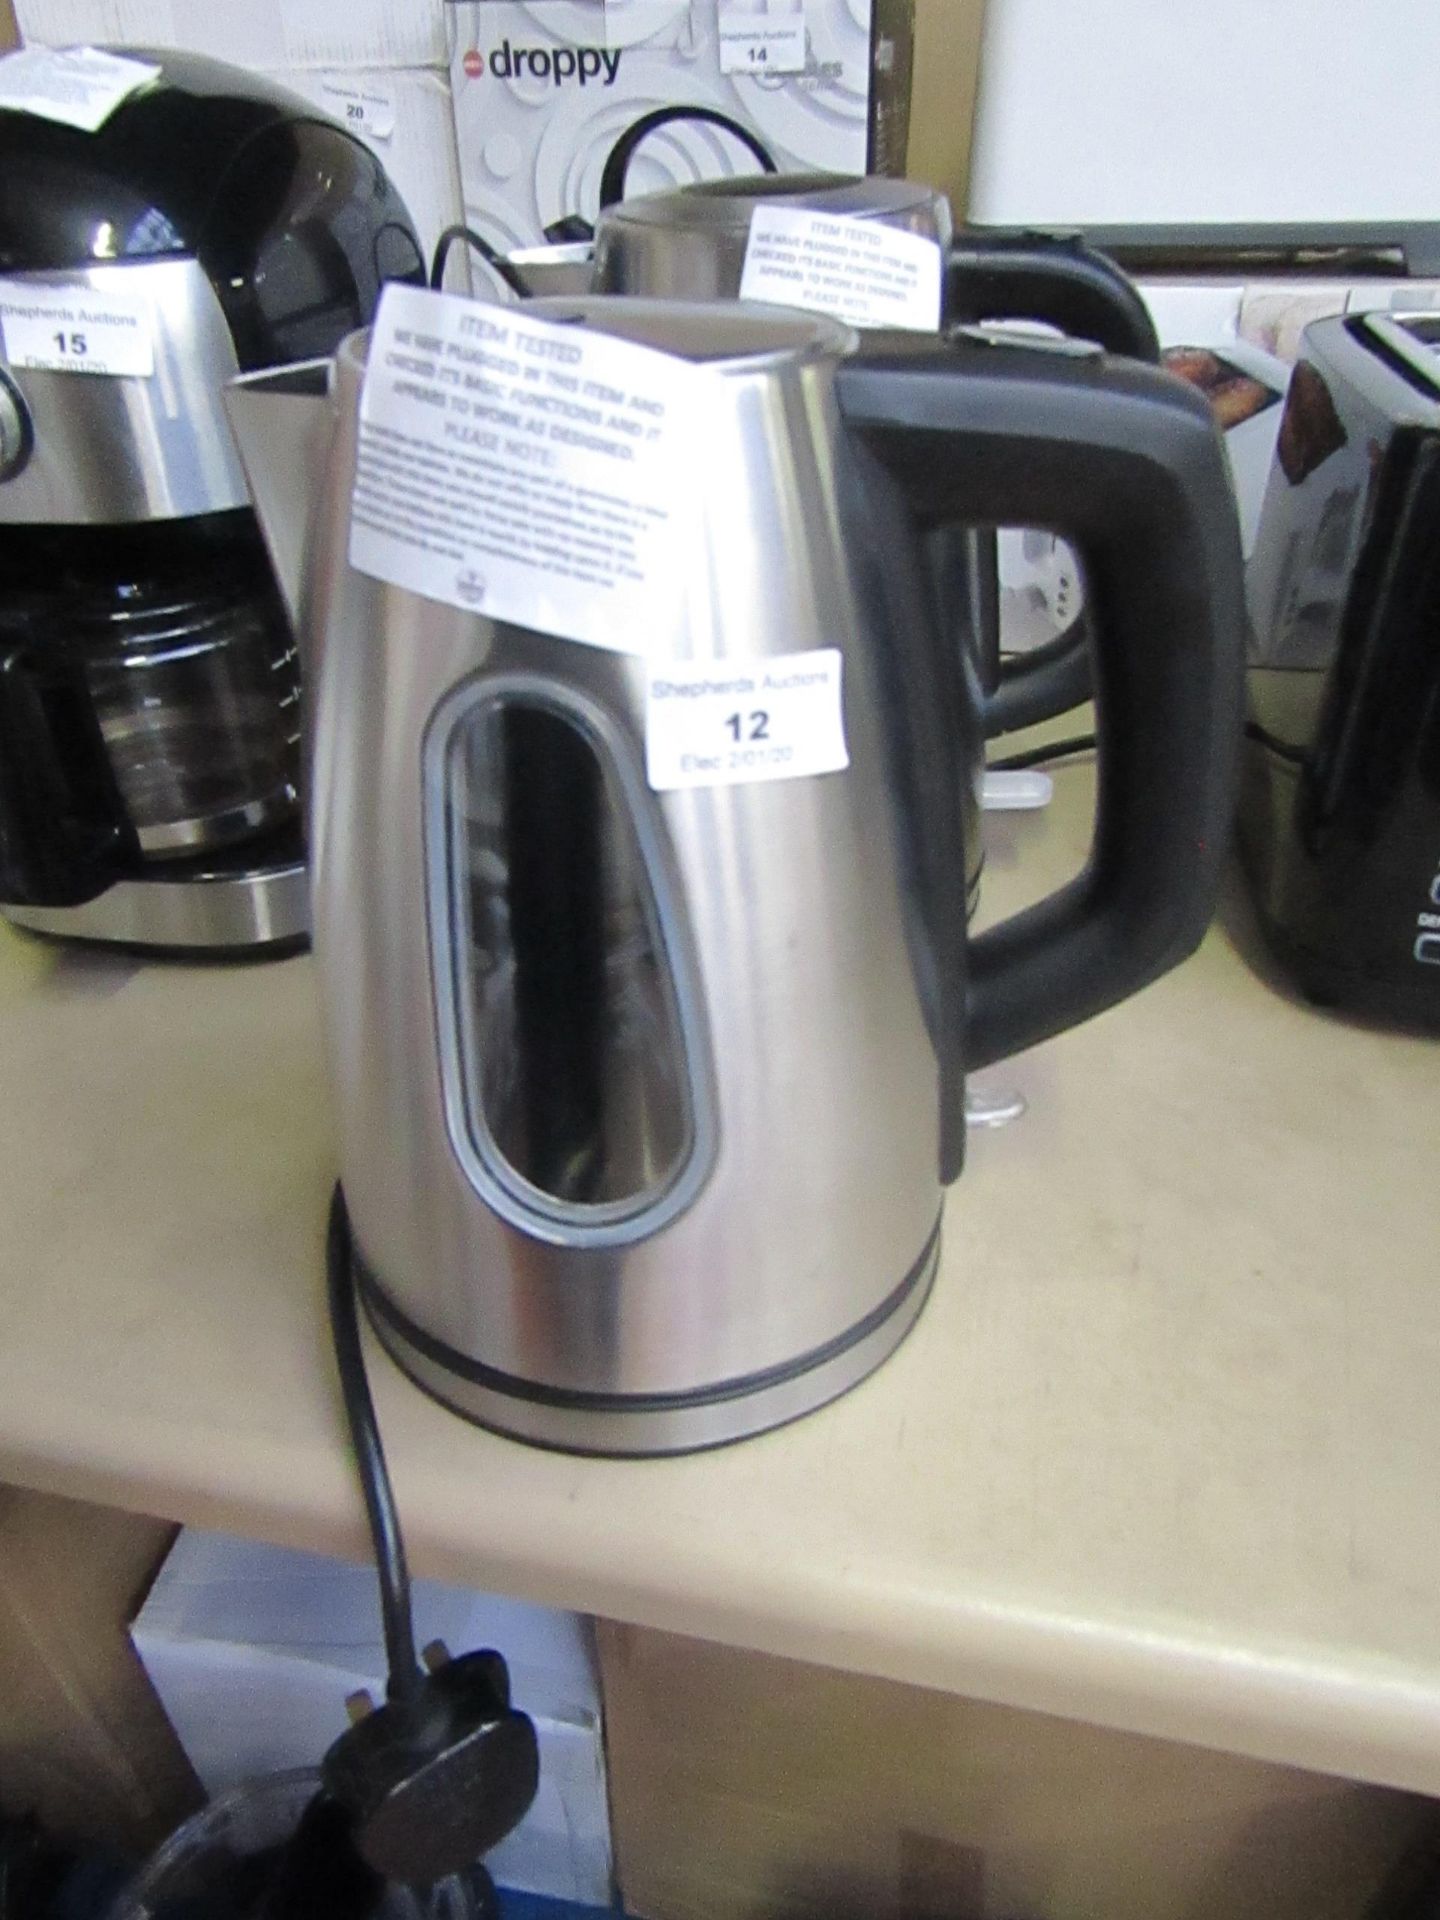 Electric Kettle - (Stainless steel) - Tested working.